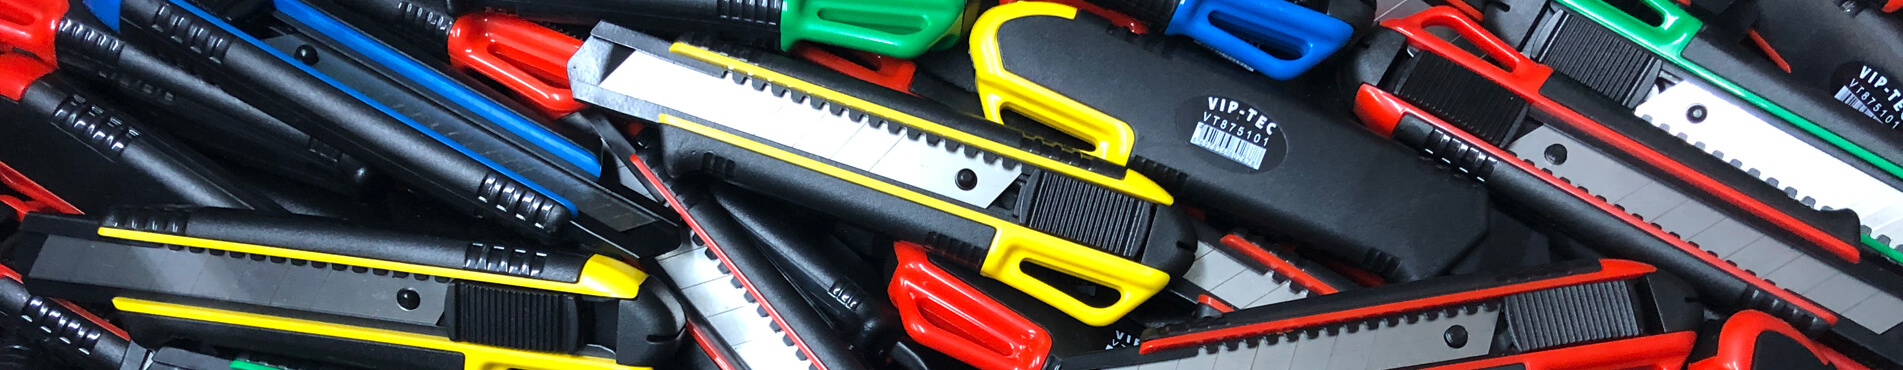 What is Utility Knife?